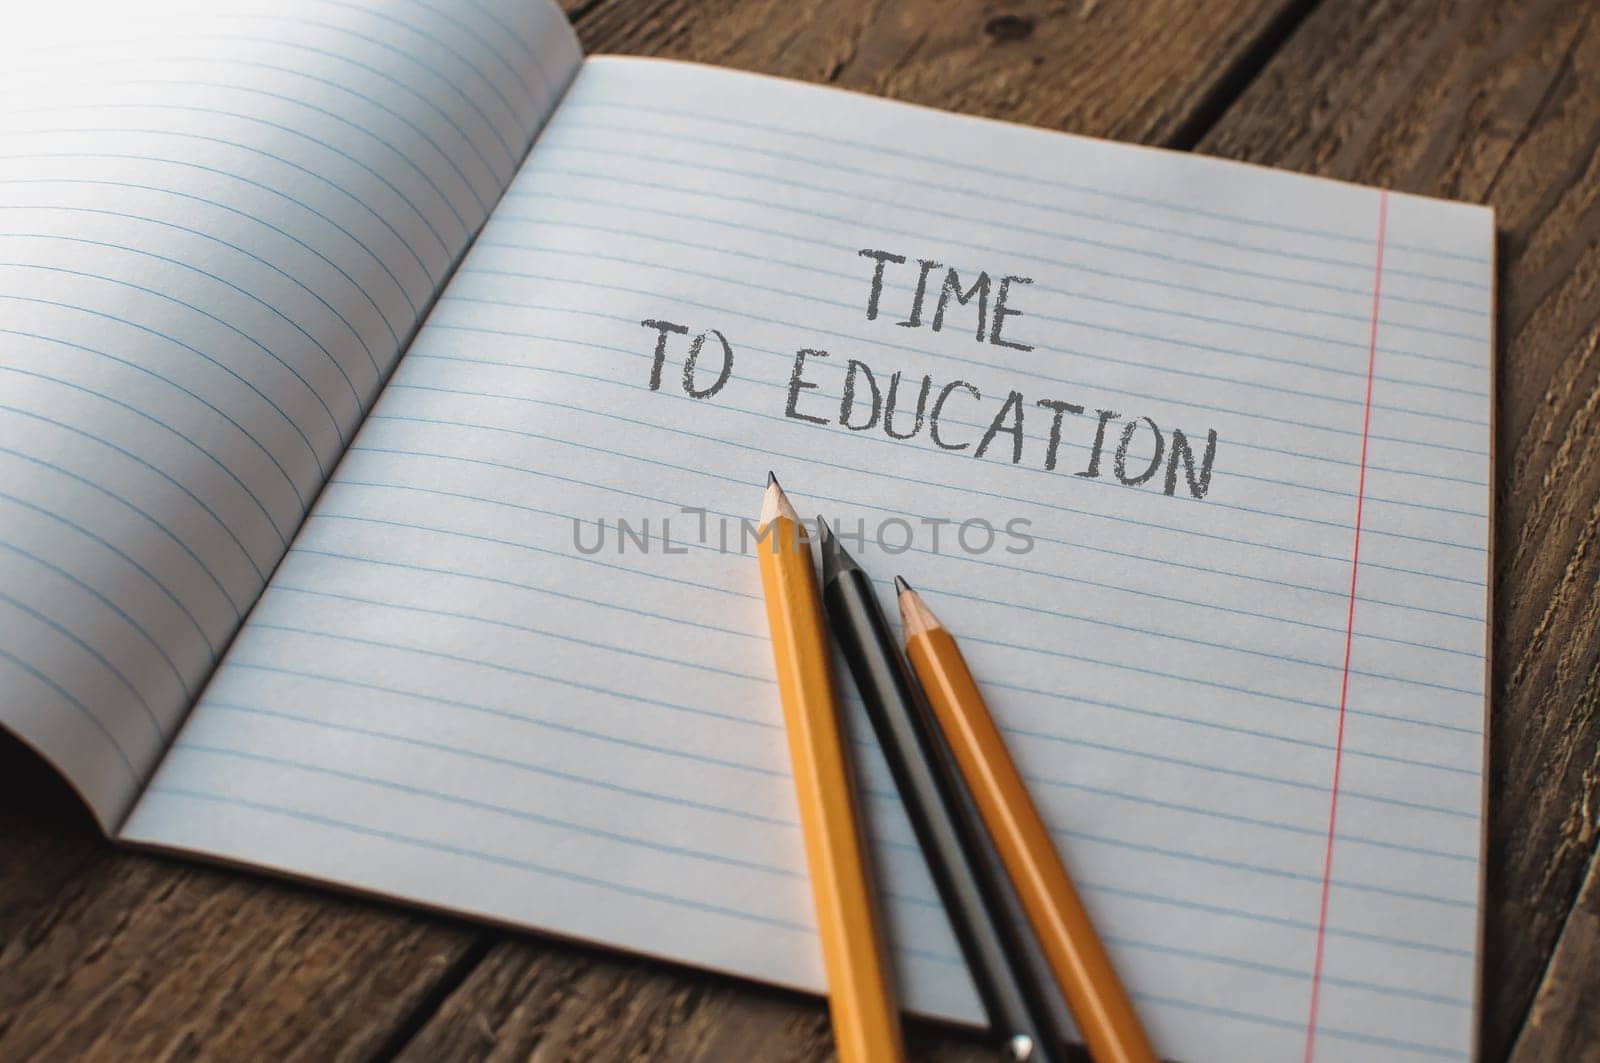 A notebook with pencils on it and the words time to education written on it. The pencils are placed on the paper in a way that they look like they are ready to be used for writing